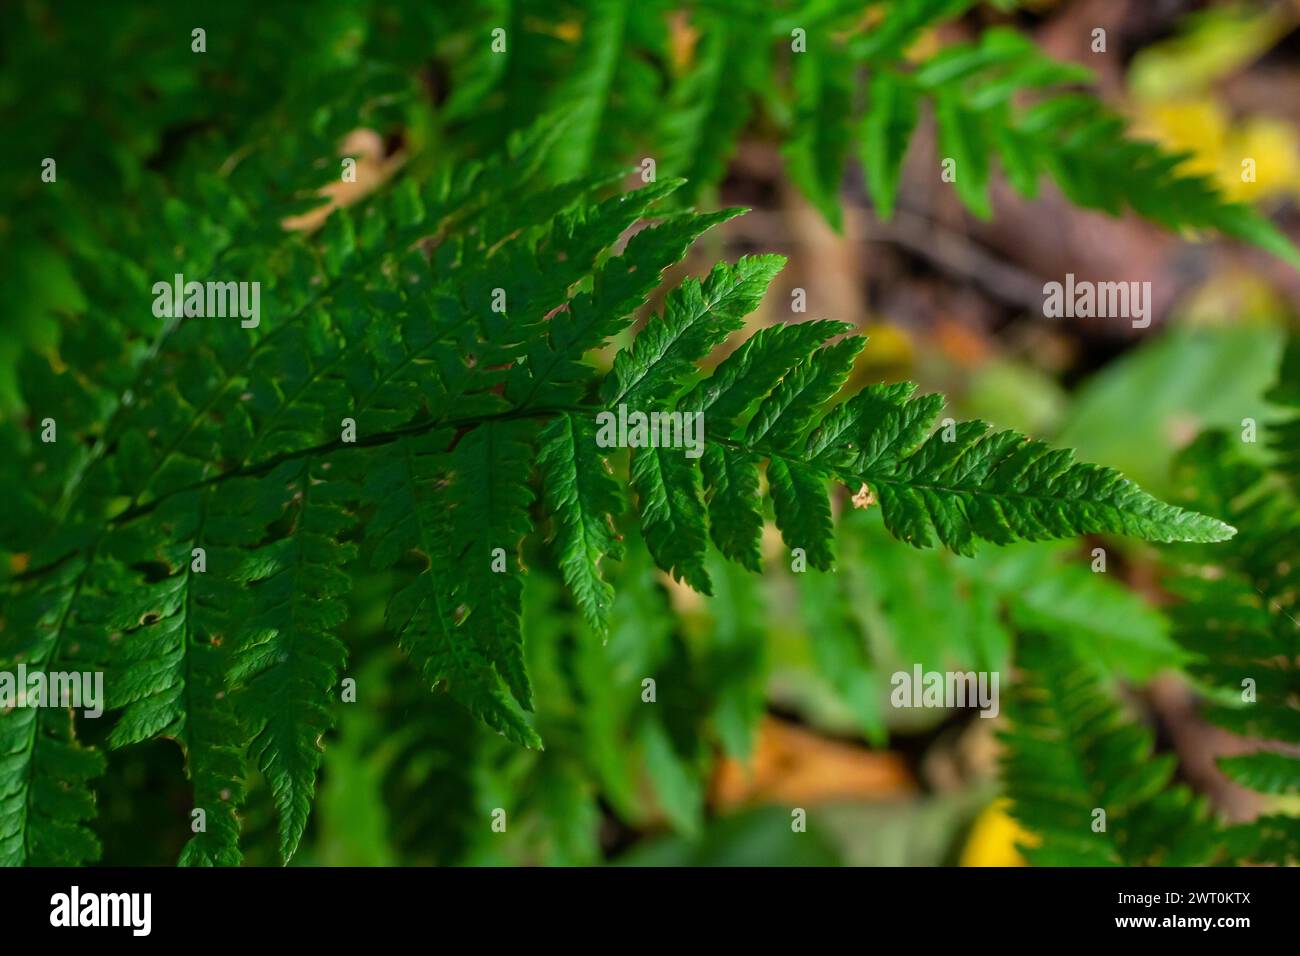 Green leaves of a young fern in spring and early morning under the bright sun. Stock Photo